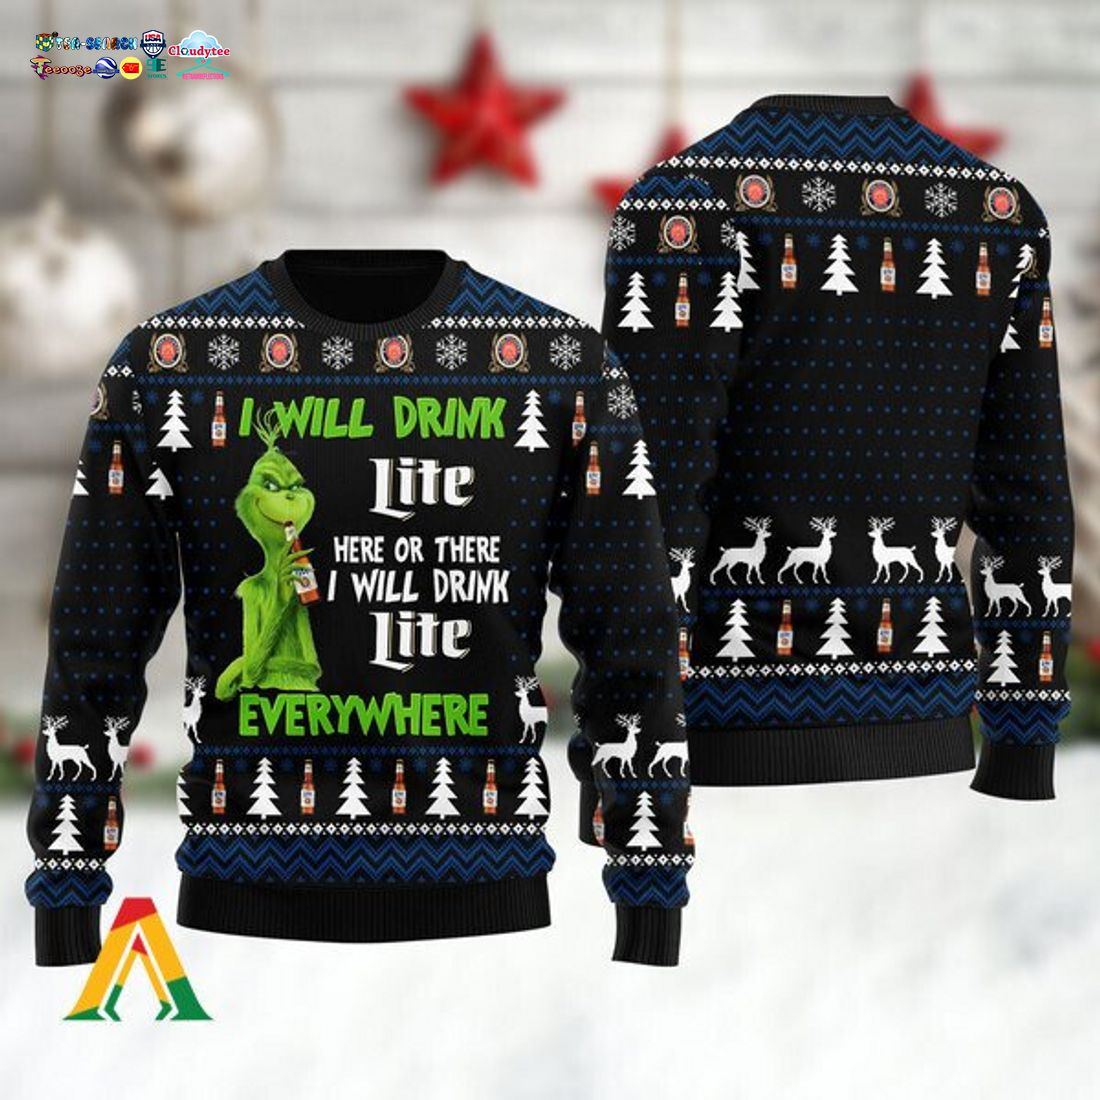 grinch-i-will-drink-miller-lite-everywhere-ugly-christmas-sweater-1-cEX86.jpg